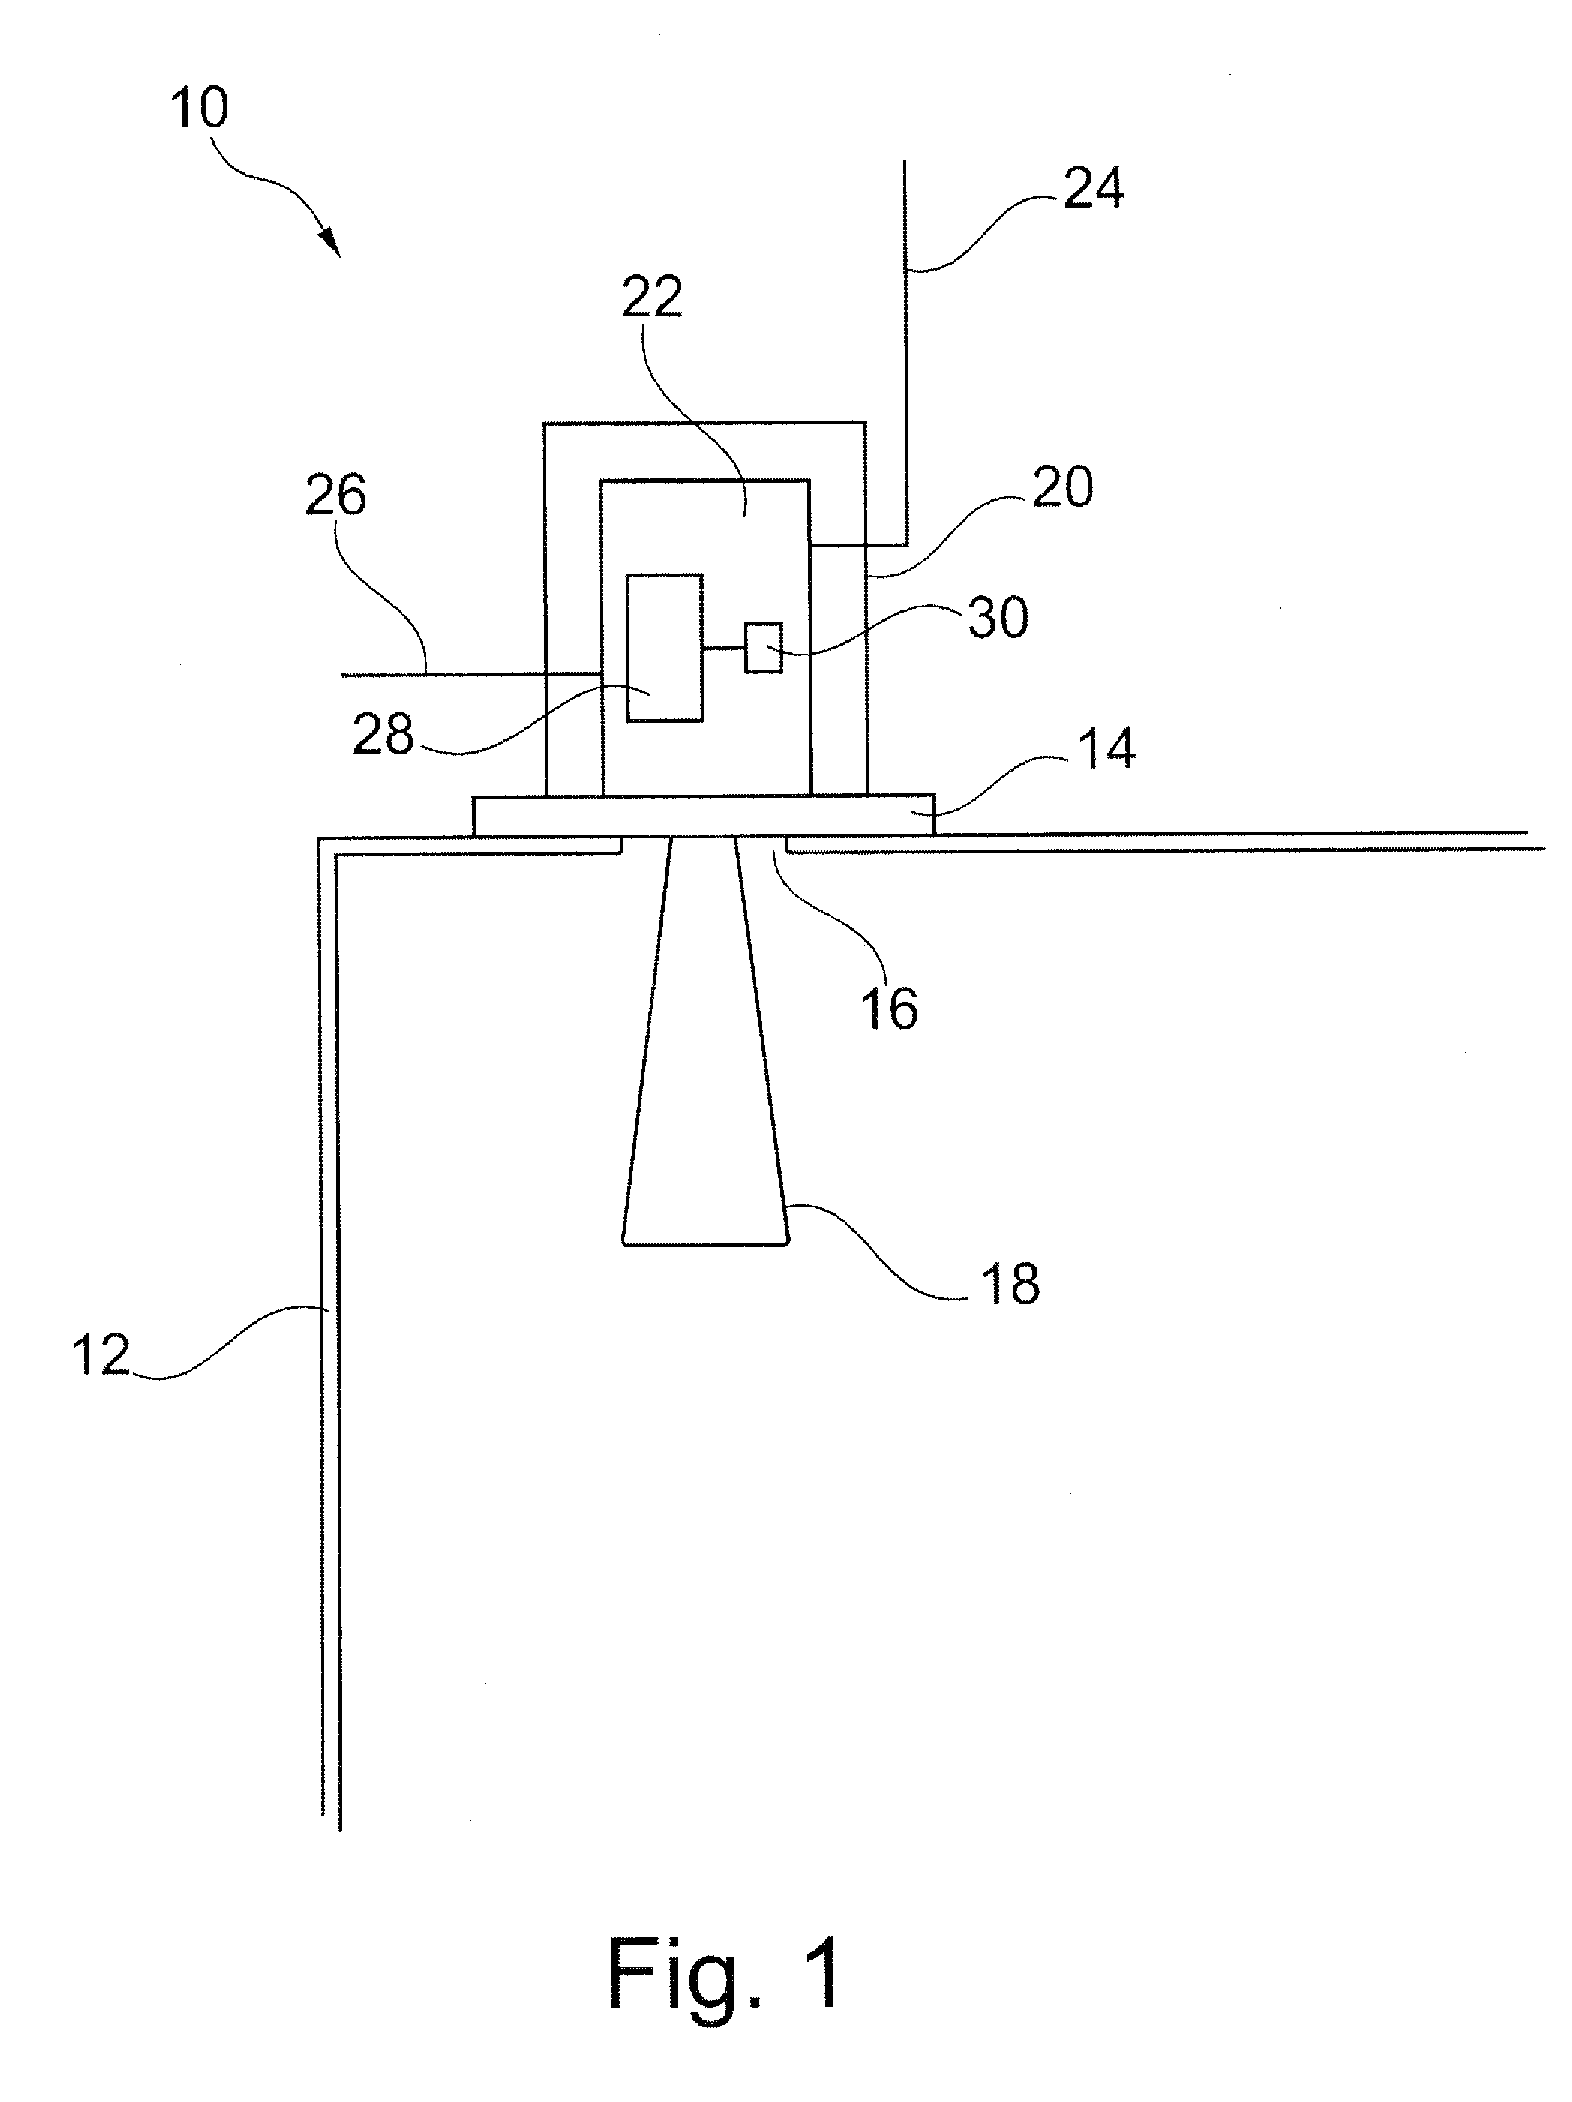 Energy Saving Control for a Field Device